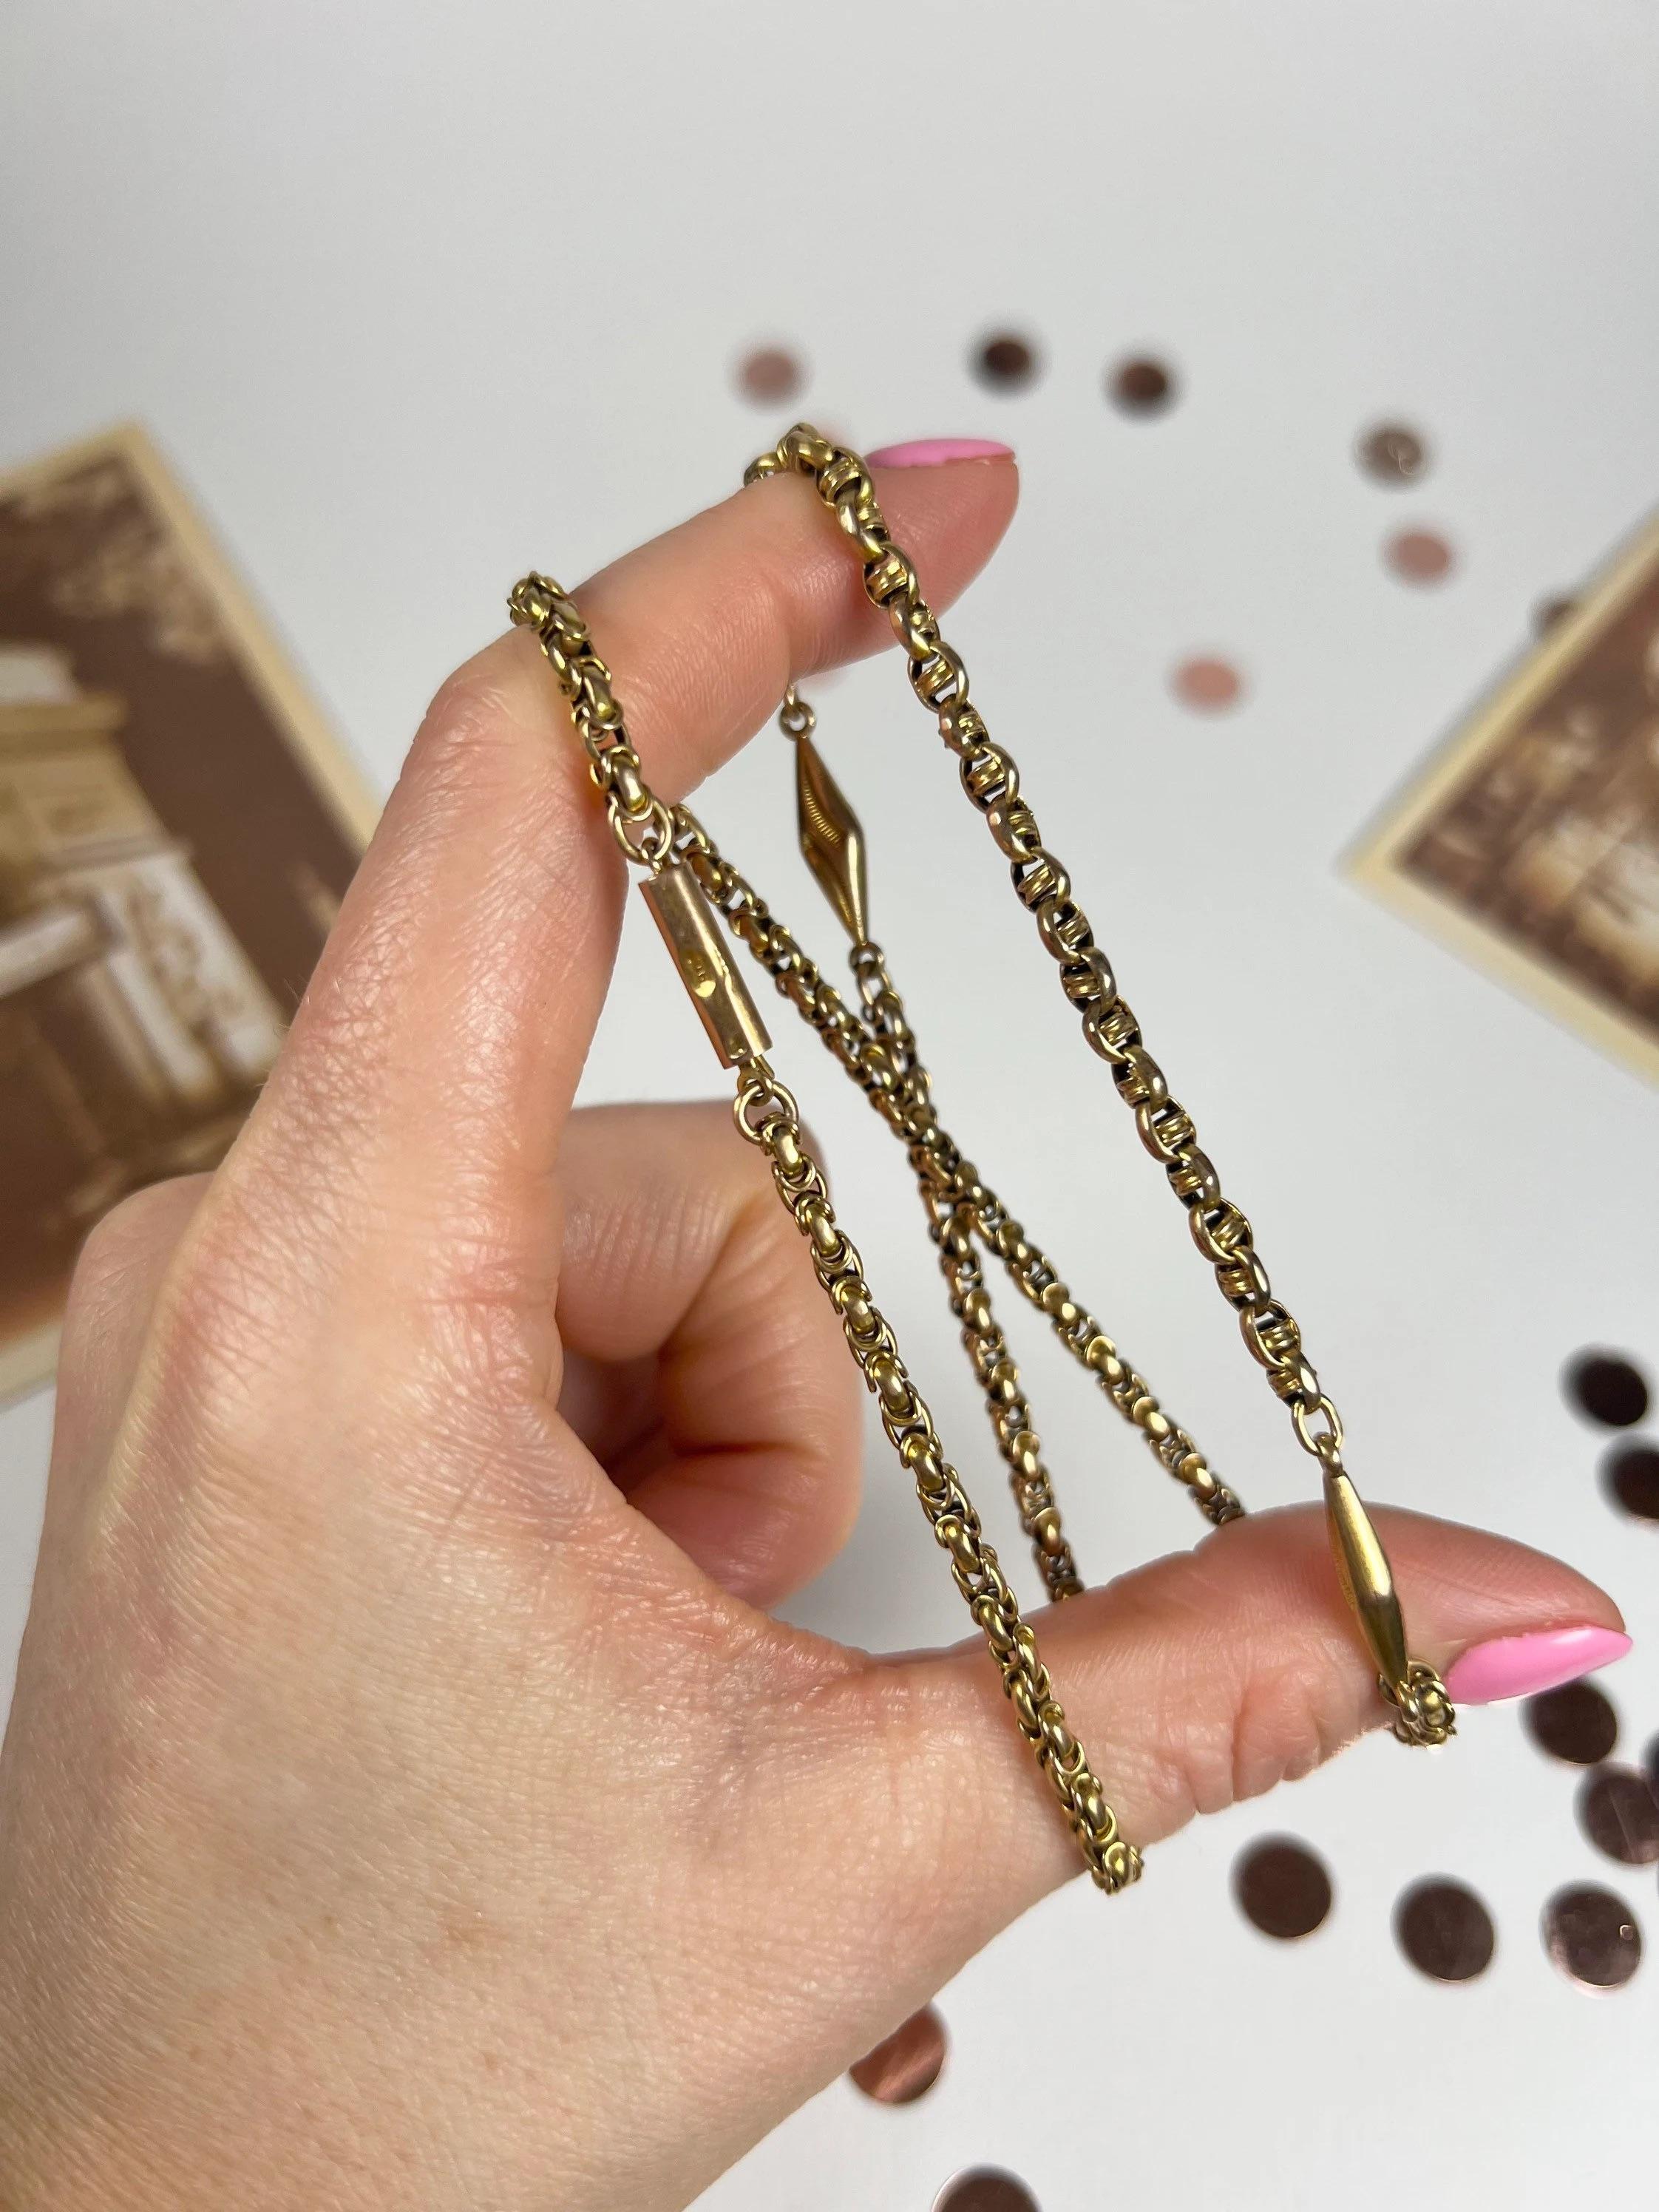 Antique 9ct Gold Edwardian Fancy Link Chain In Good Condition For Sale In Brighton, GB